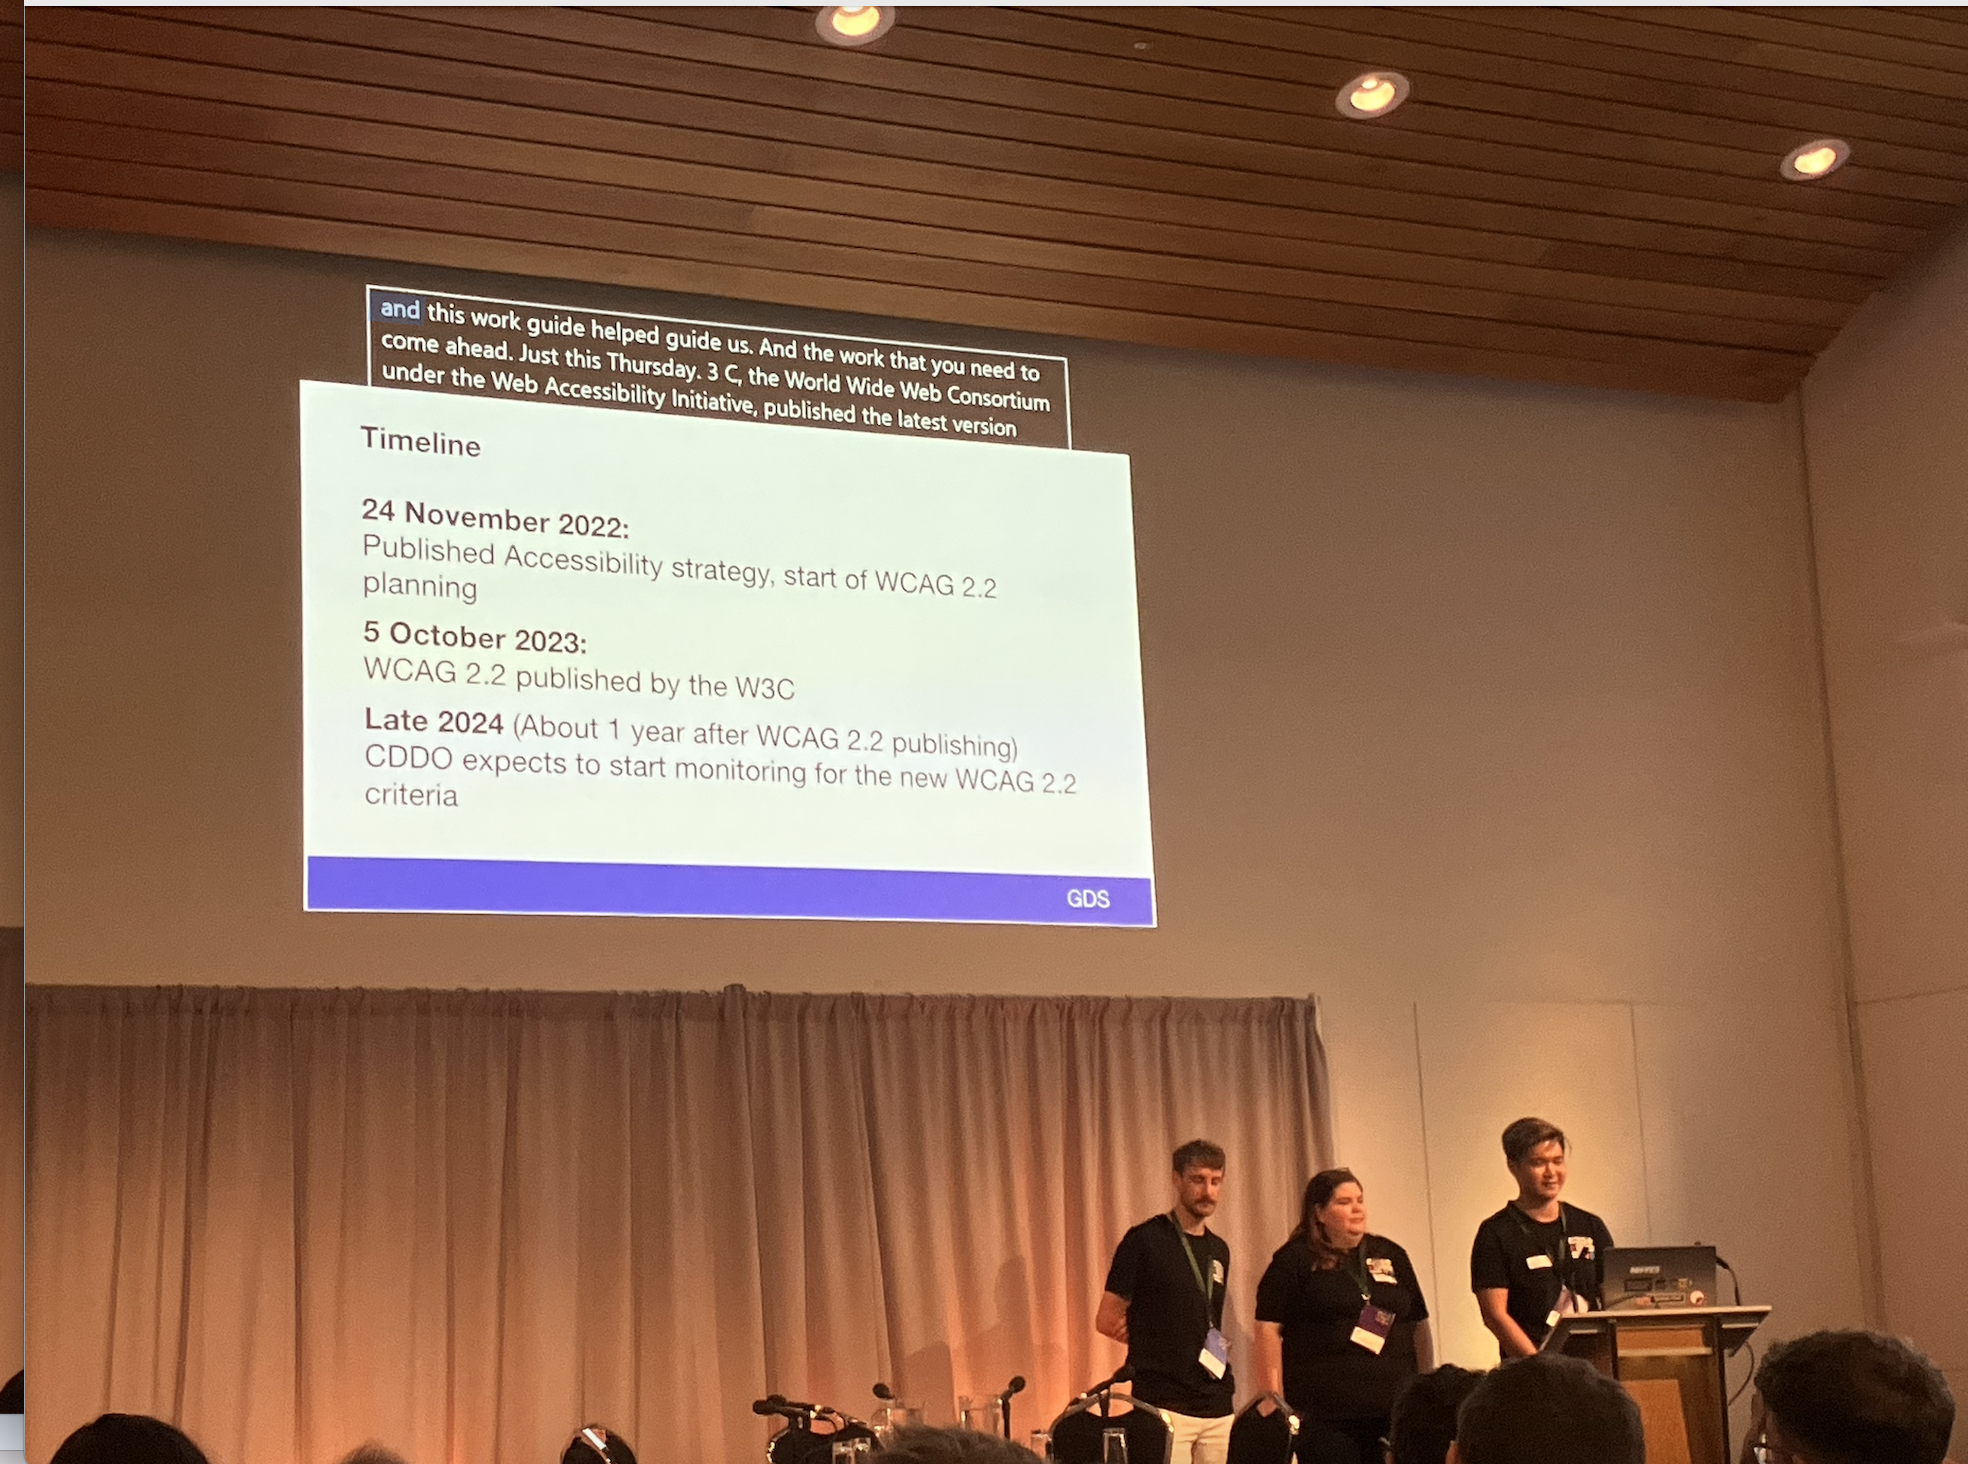 3 people on stage with screen saying "timeline - 24 November 2022: published accessibility startegy, start of WCAG 2.2 planning; 5 October 2023: WCAG 2.2 published by the W3C; late 2024 (about 1 year after WCAG 2.2 publishing) CDDO expects to start monitoring for the new WCAG 2.2 criteria)